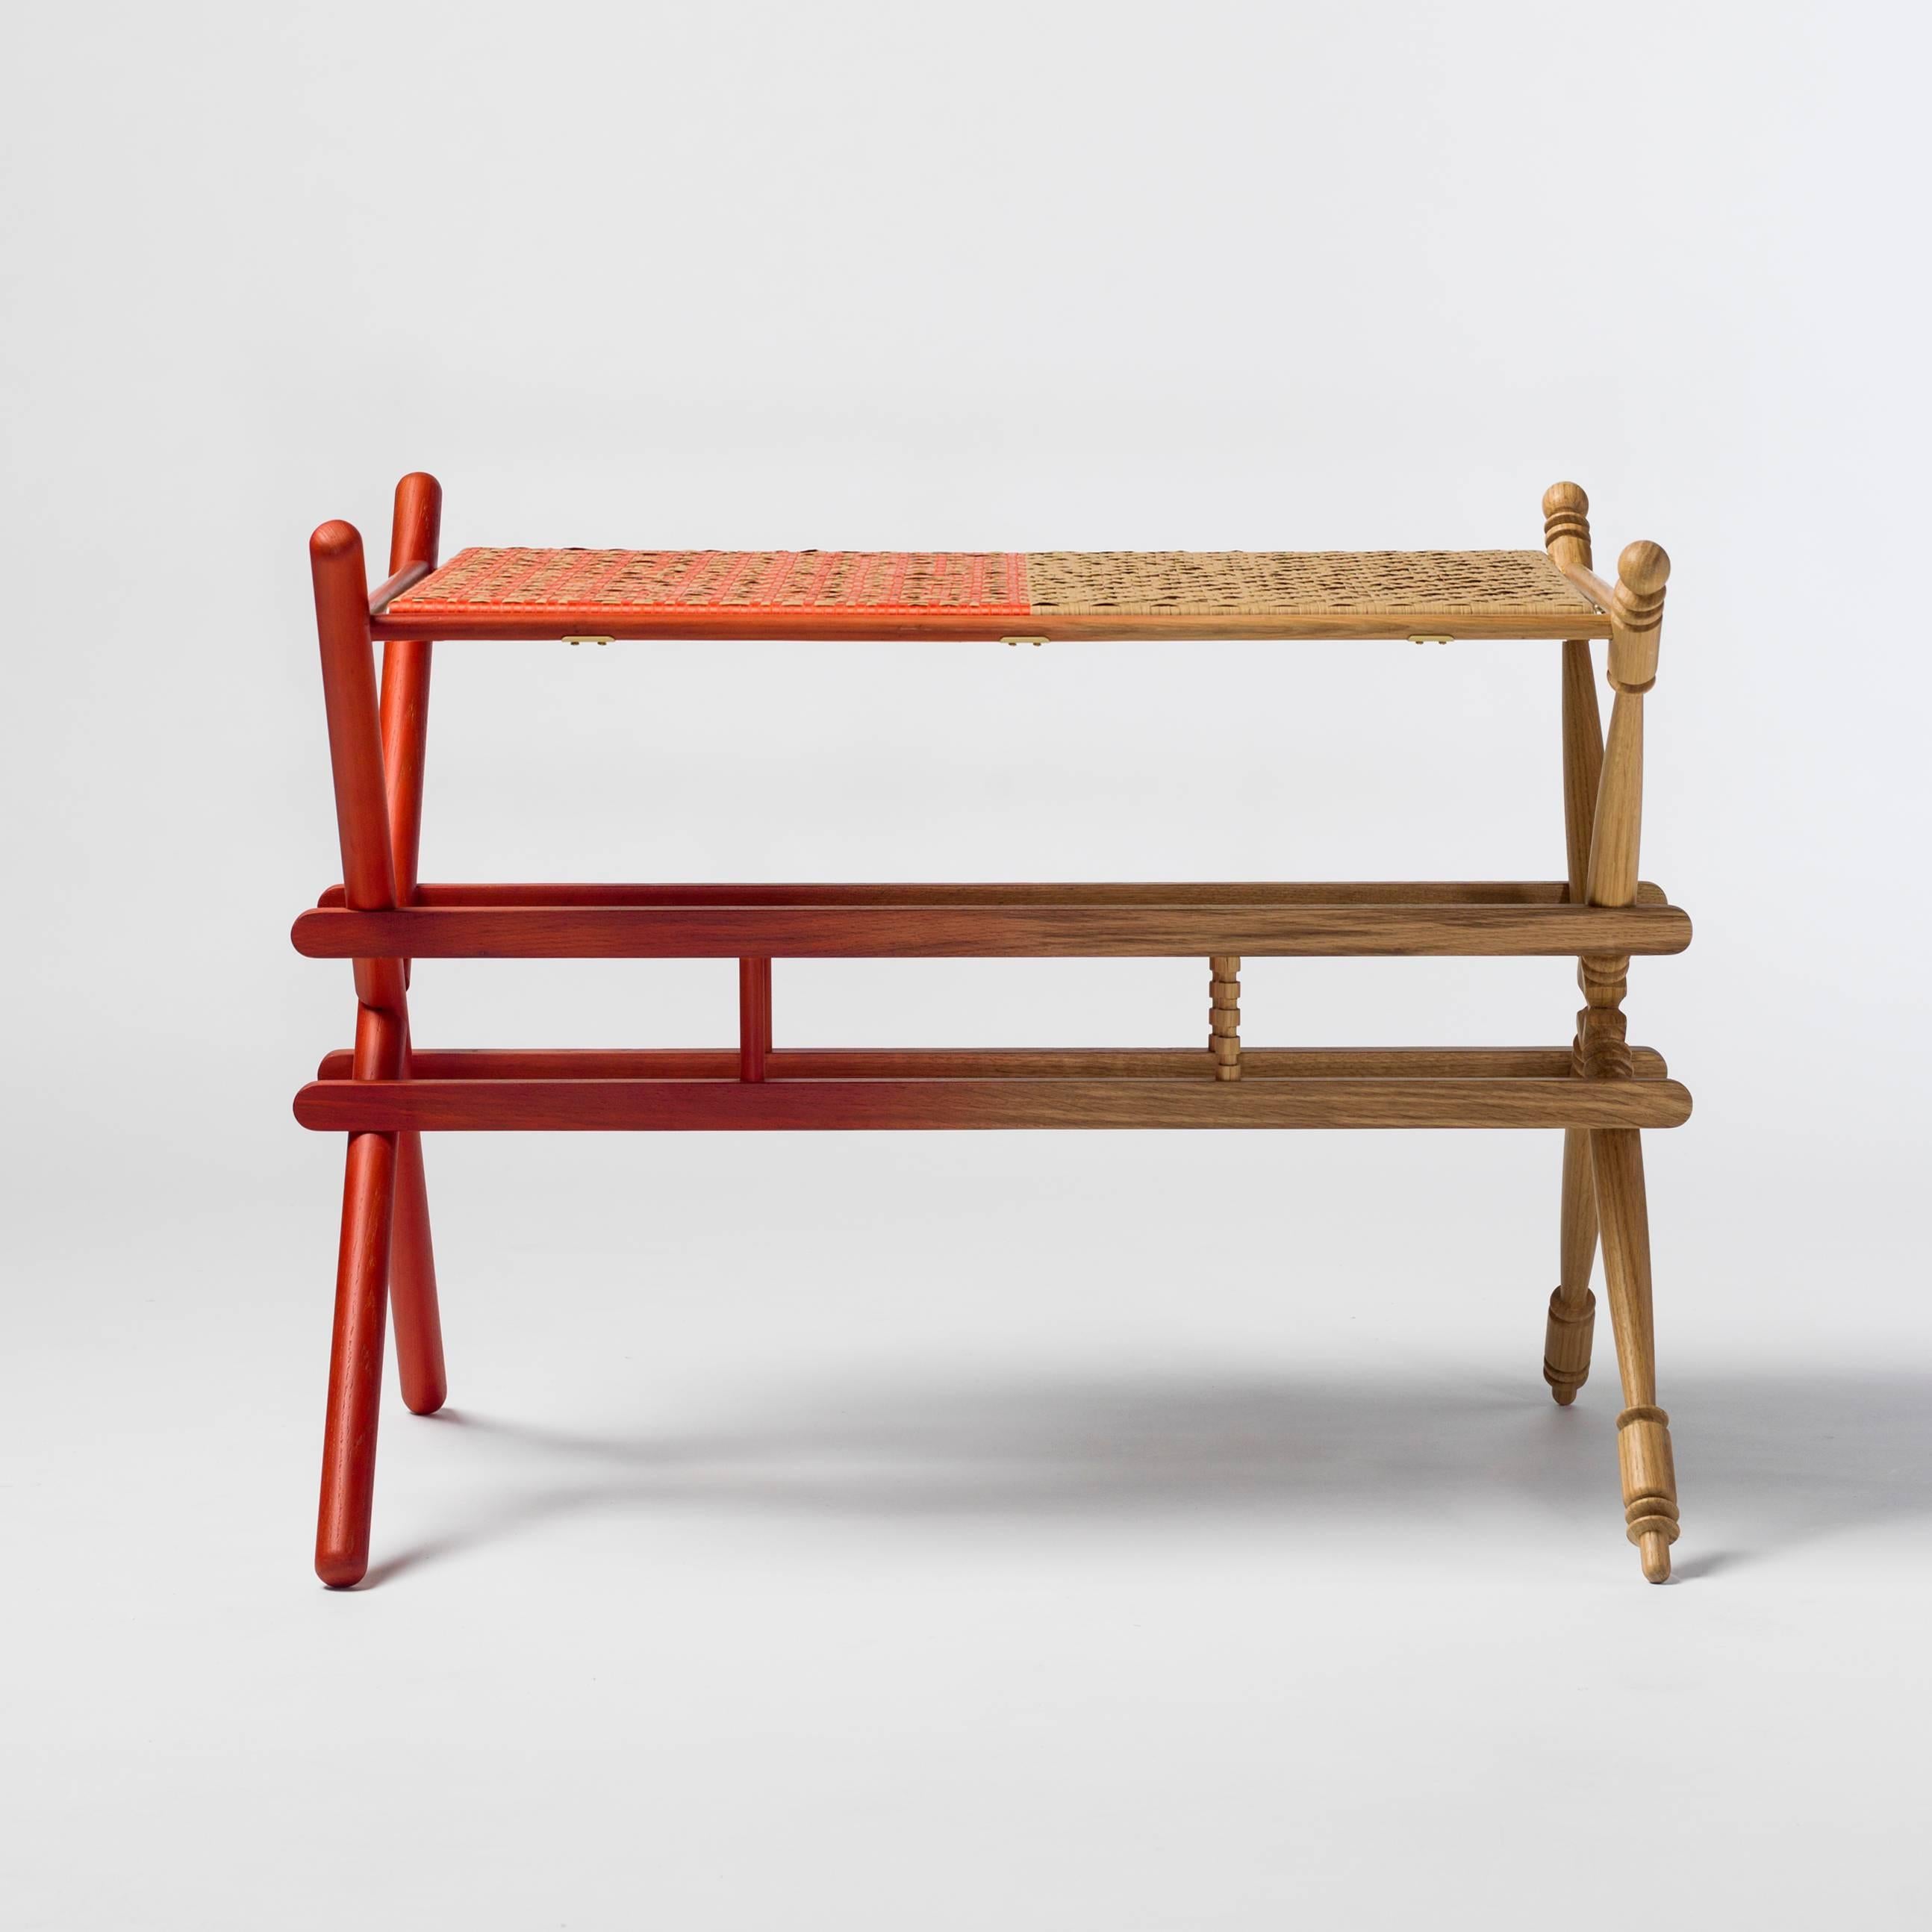 Solid oak structure with degraded red finish and tray made
with craft paper and red textile ribbon.

Limited Edition of eight units + two artist proofs + two prototypes.

Measures: 88 x 63 x 62 H cm.